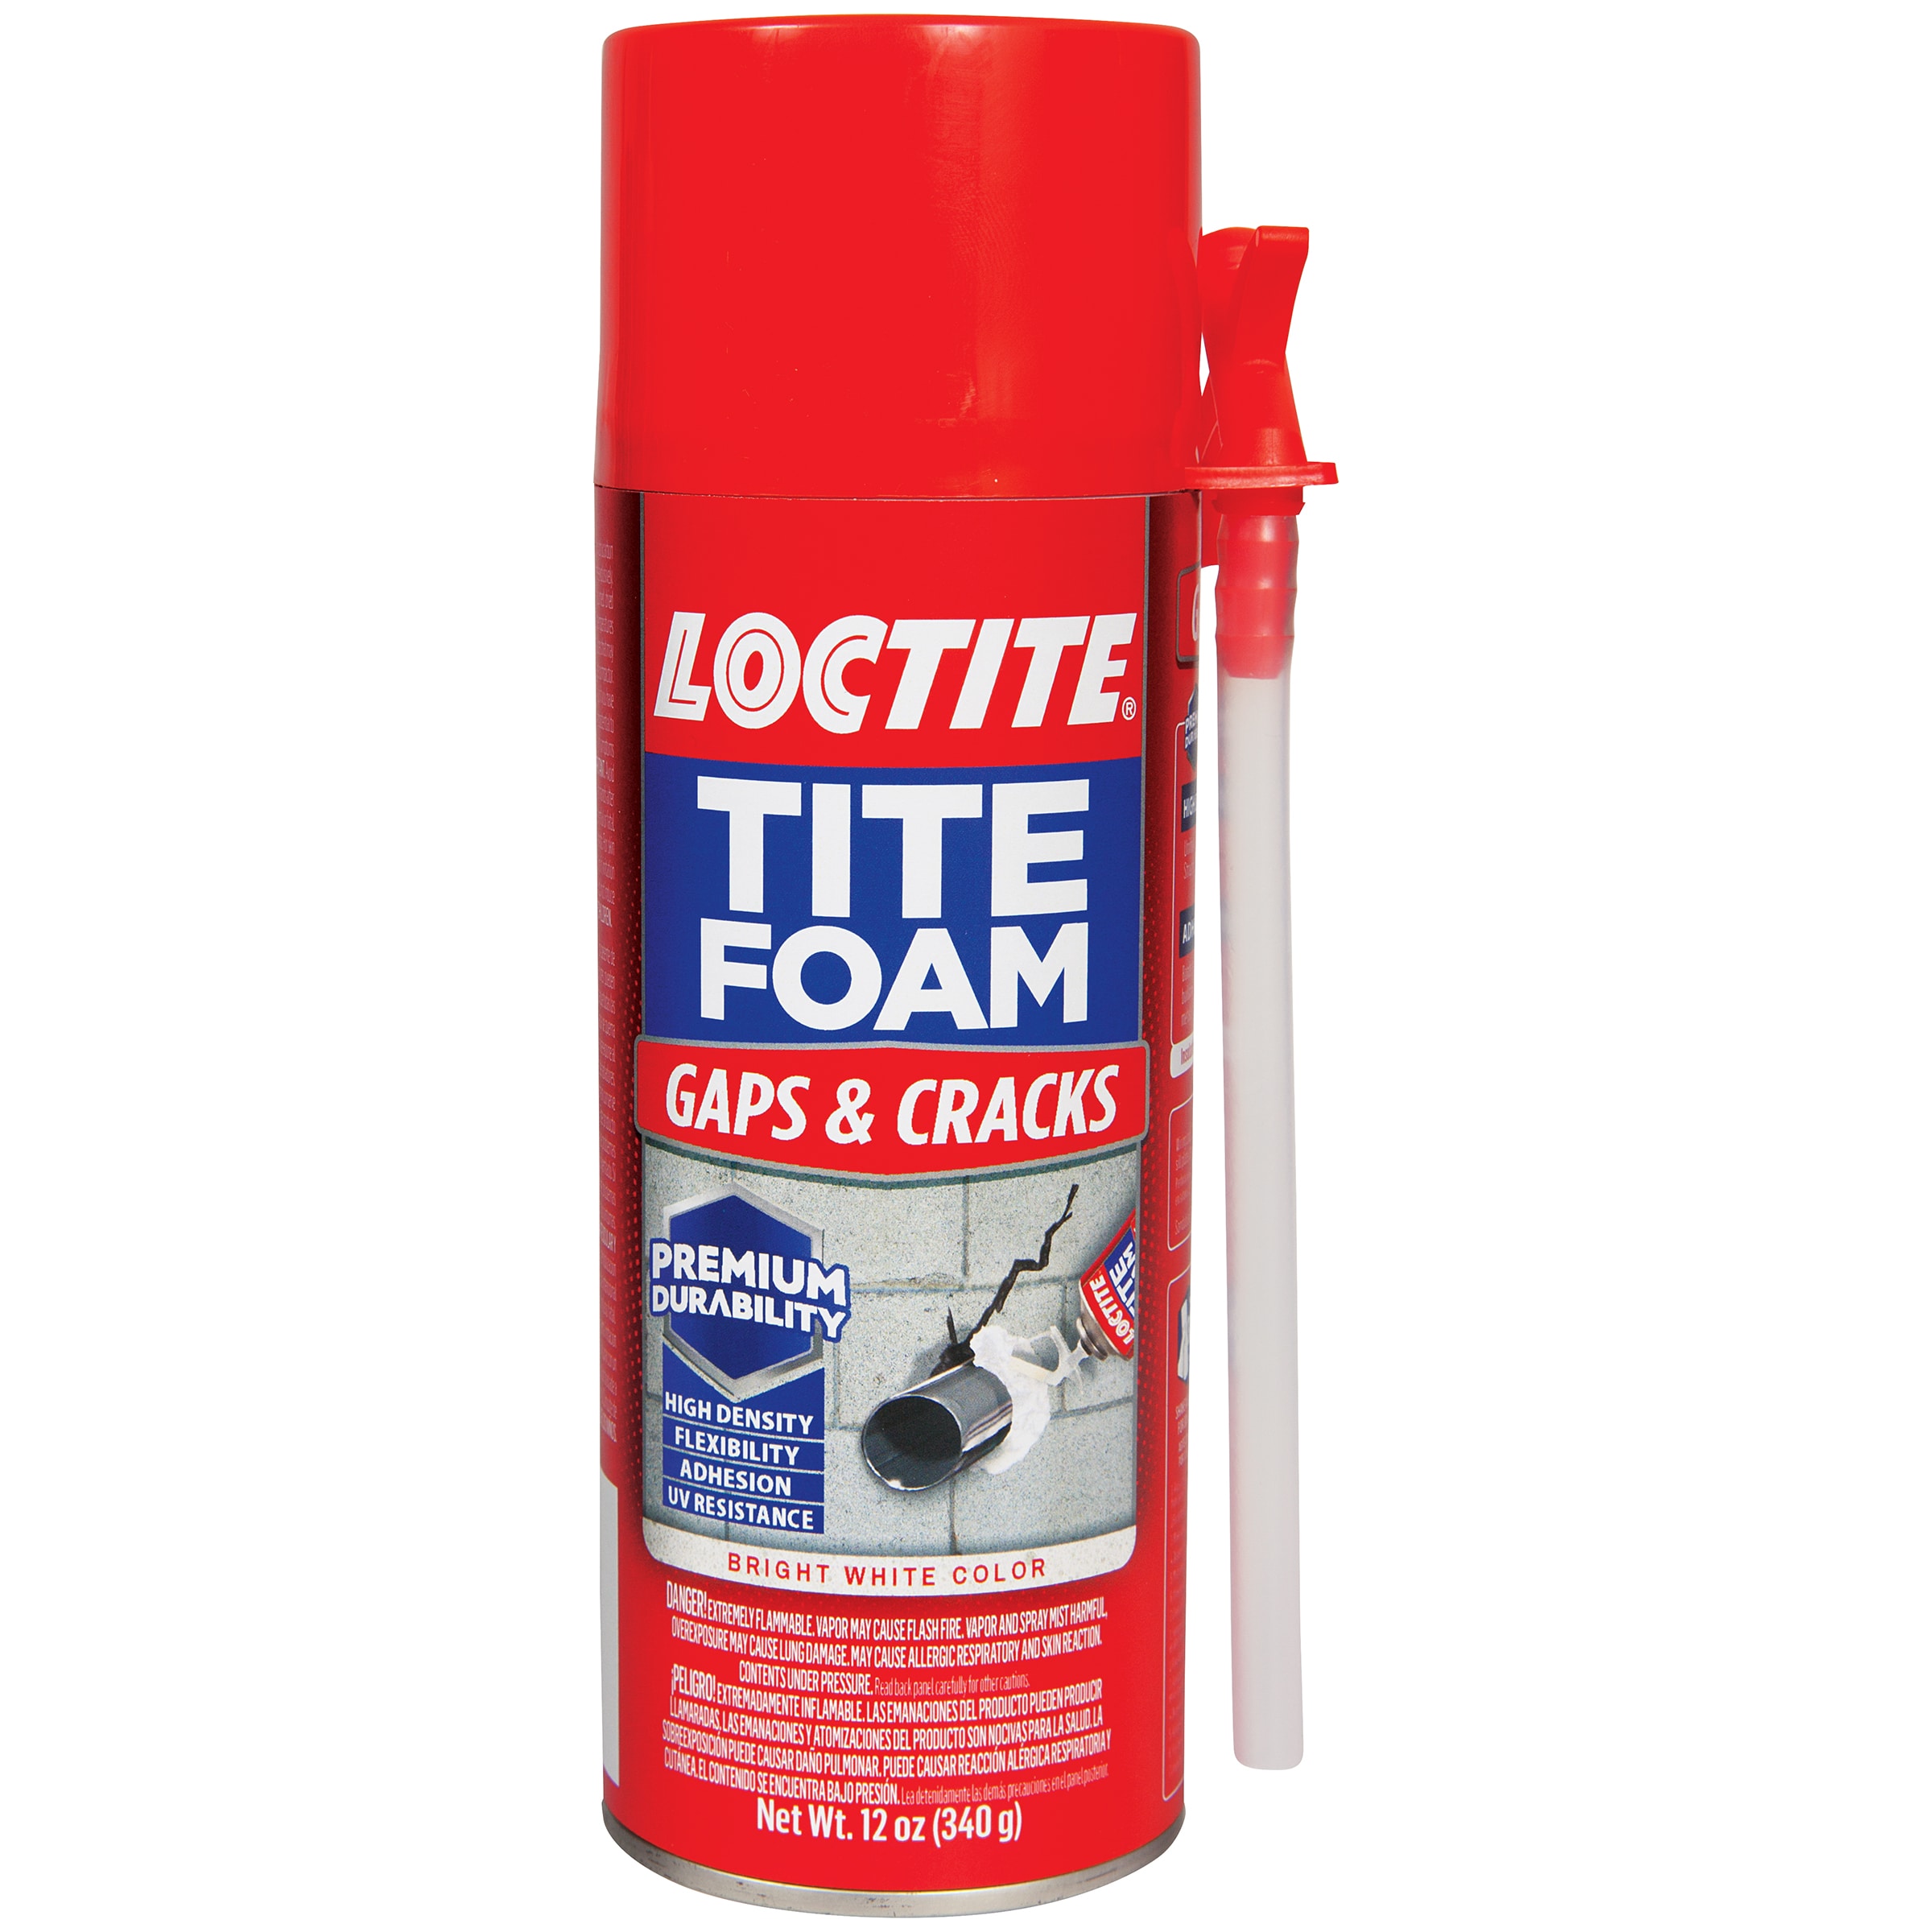 2 CANS FOAM & Fabric Glue--Spray Adhesive--Quick Tack $17.90